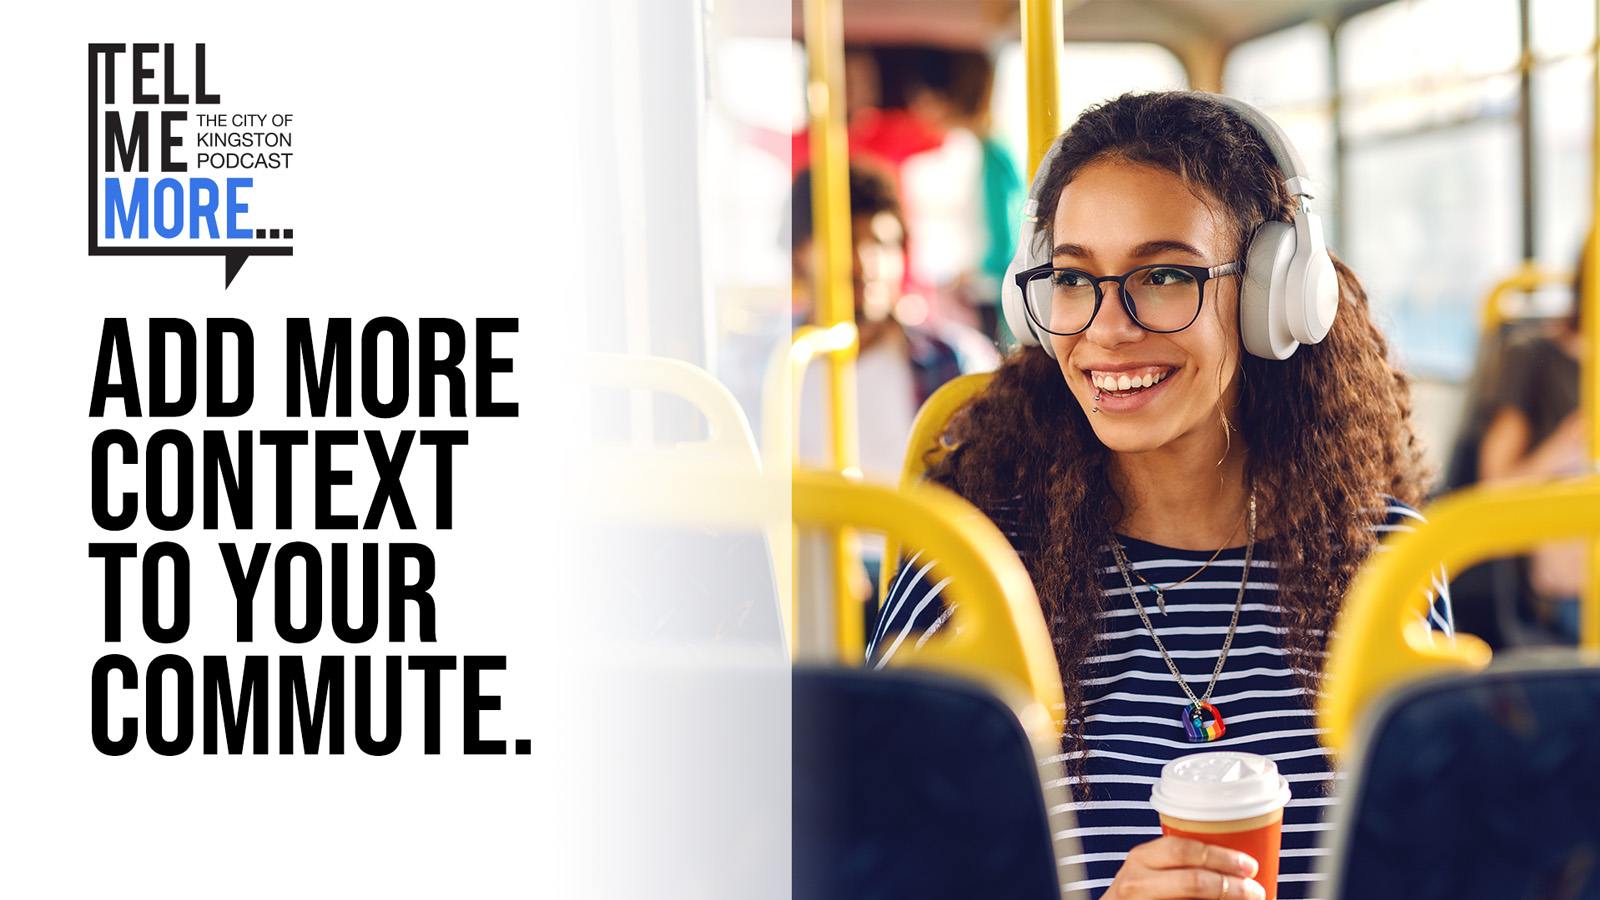 Person smiling while sitting in a City bus. Text on graphic reads "Add more context to your commute" with Tell Me More Podcast logo